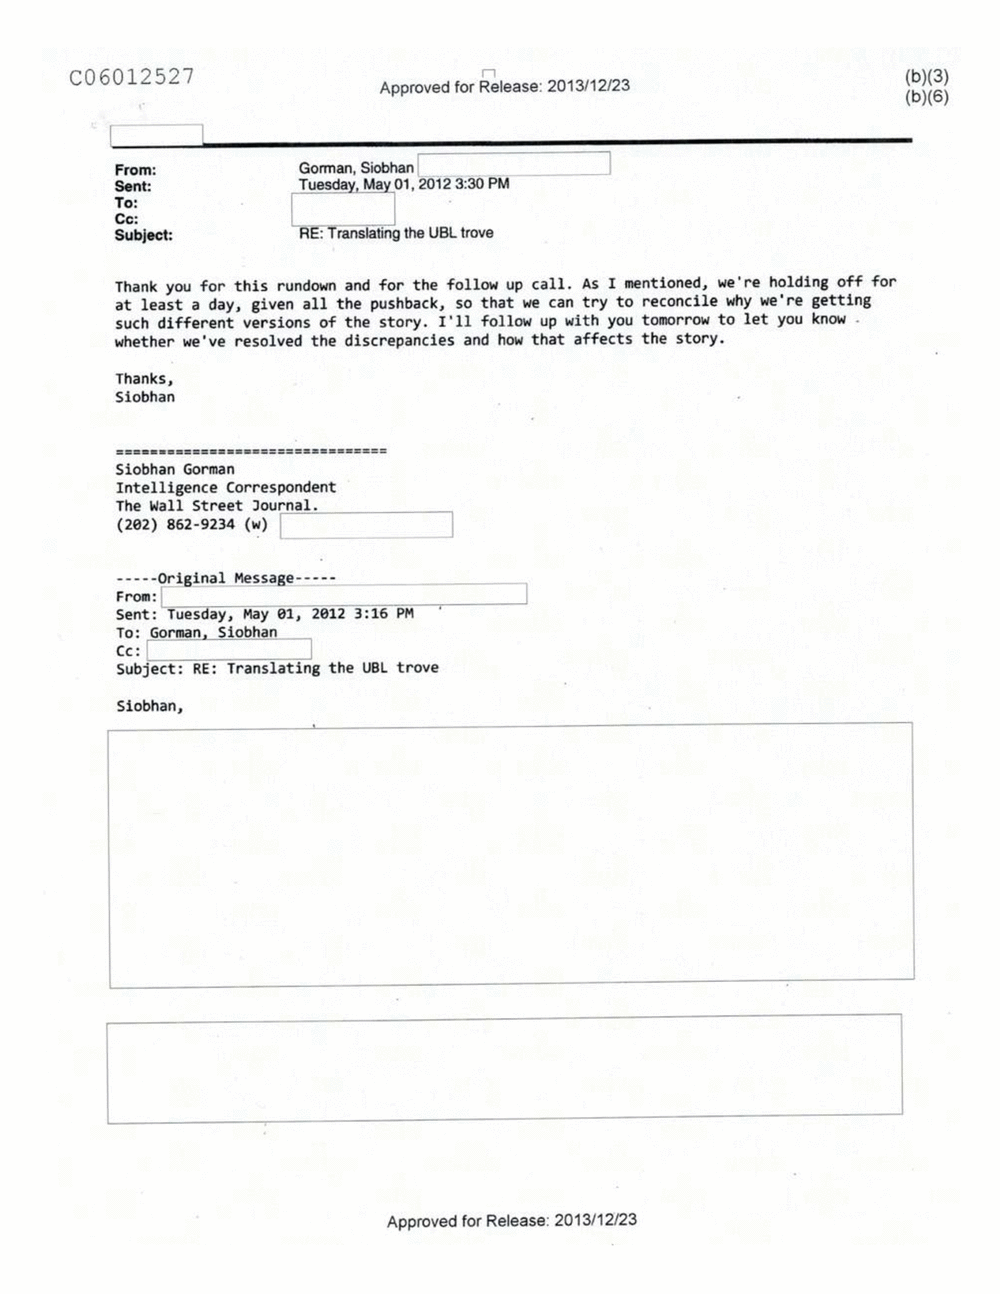 Page 50 from Email Correspondence Between Reporters and CIA Flacks